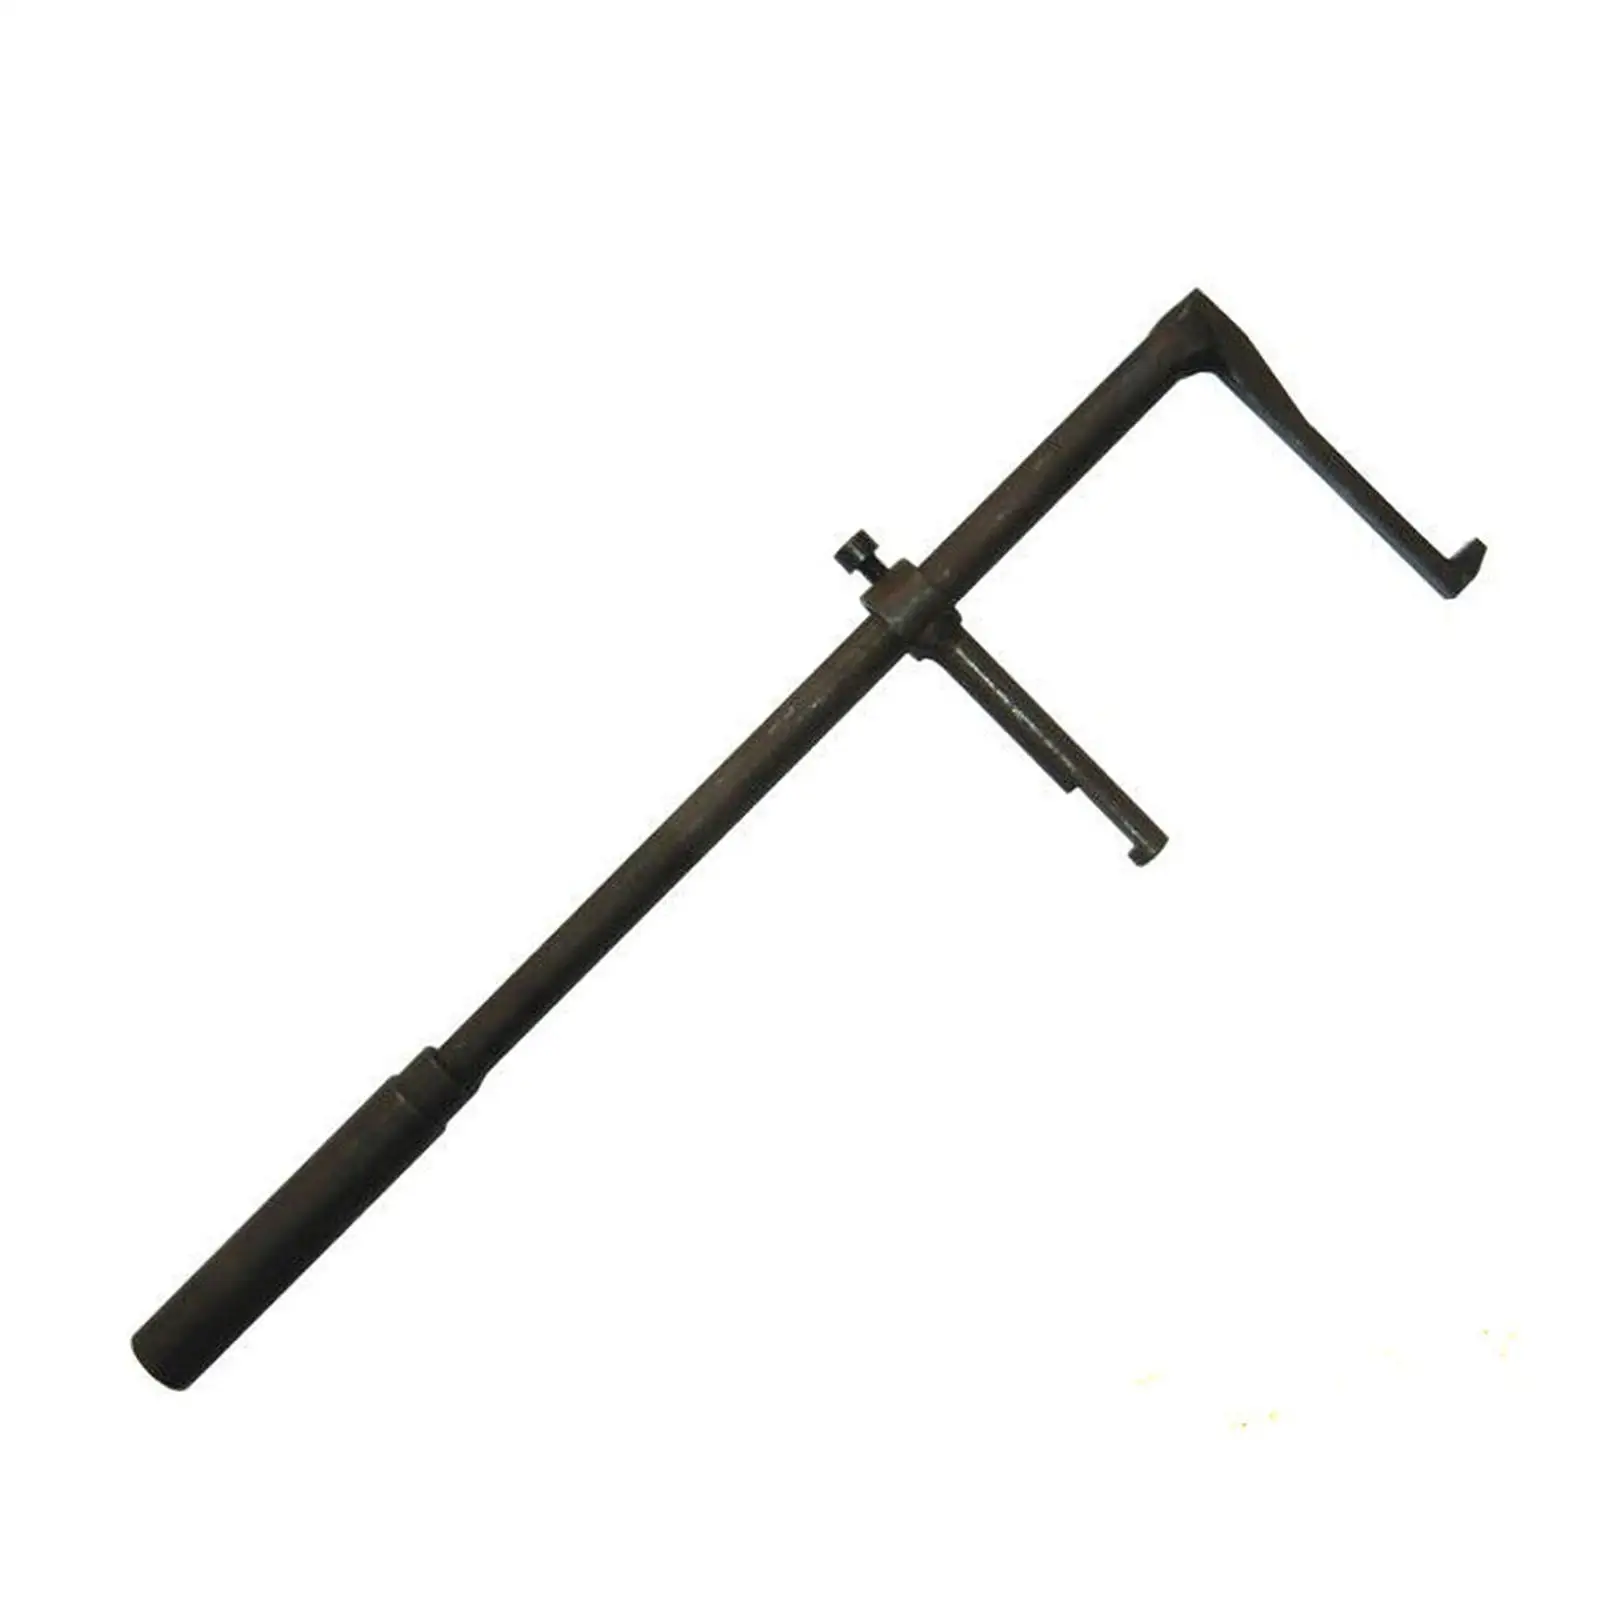 Front Fork Oil Seal Puller Remover O Sealing Puller Install Tool for